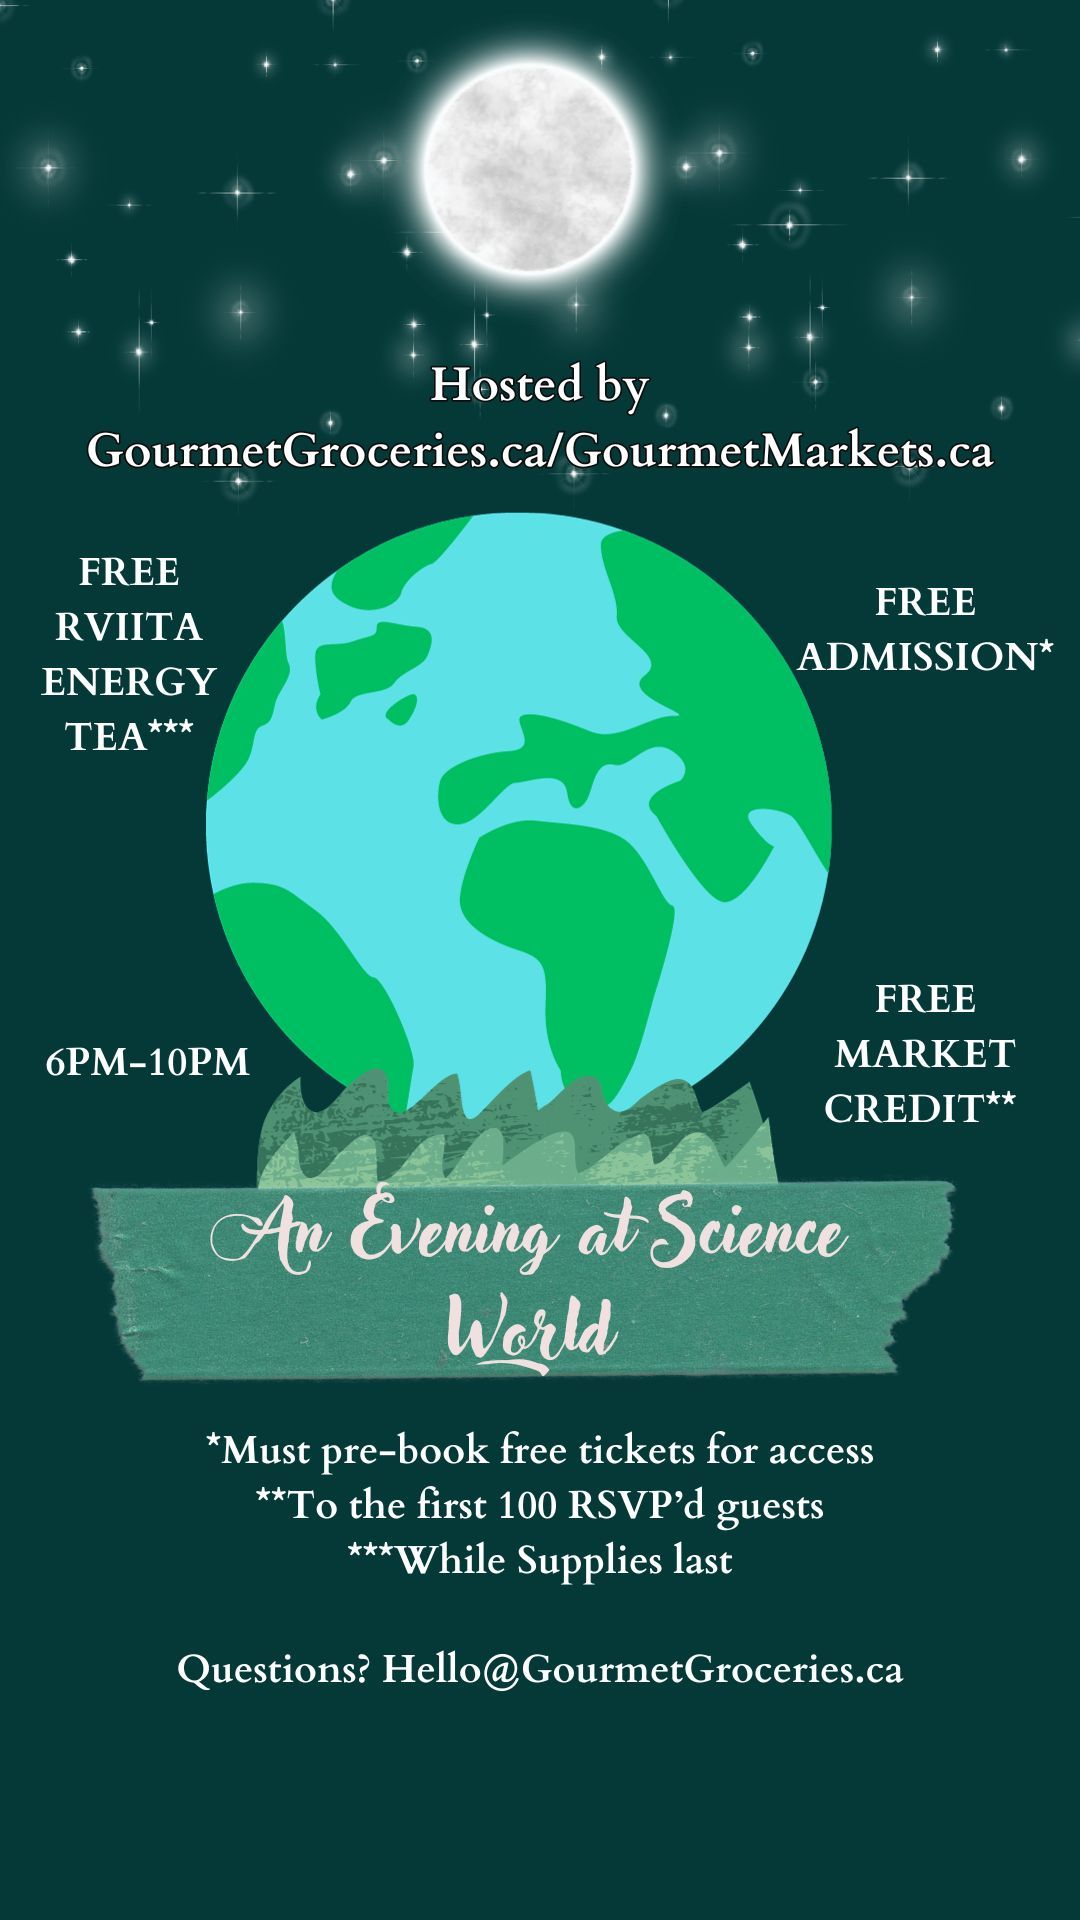 Night Market at Science World (Hosted by GourmetMarkets.ca)